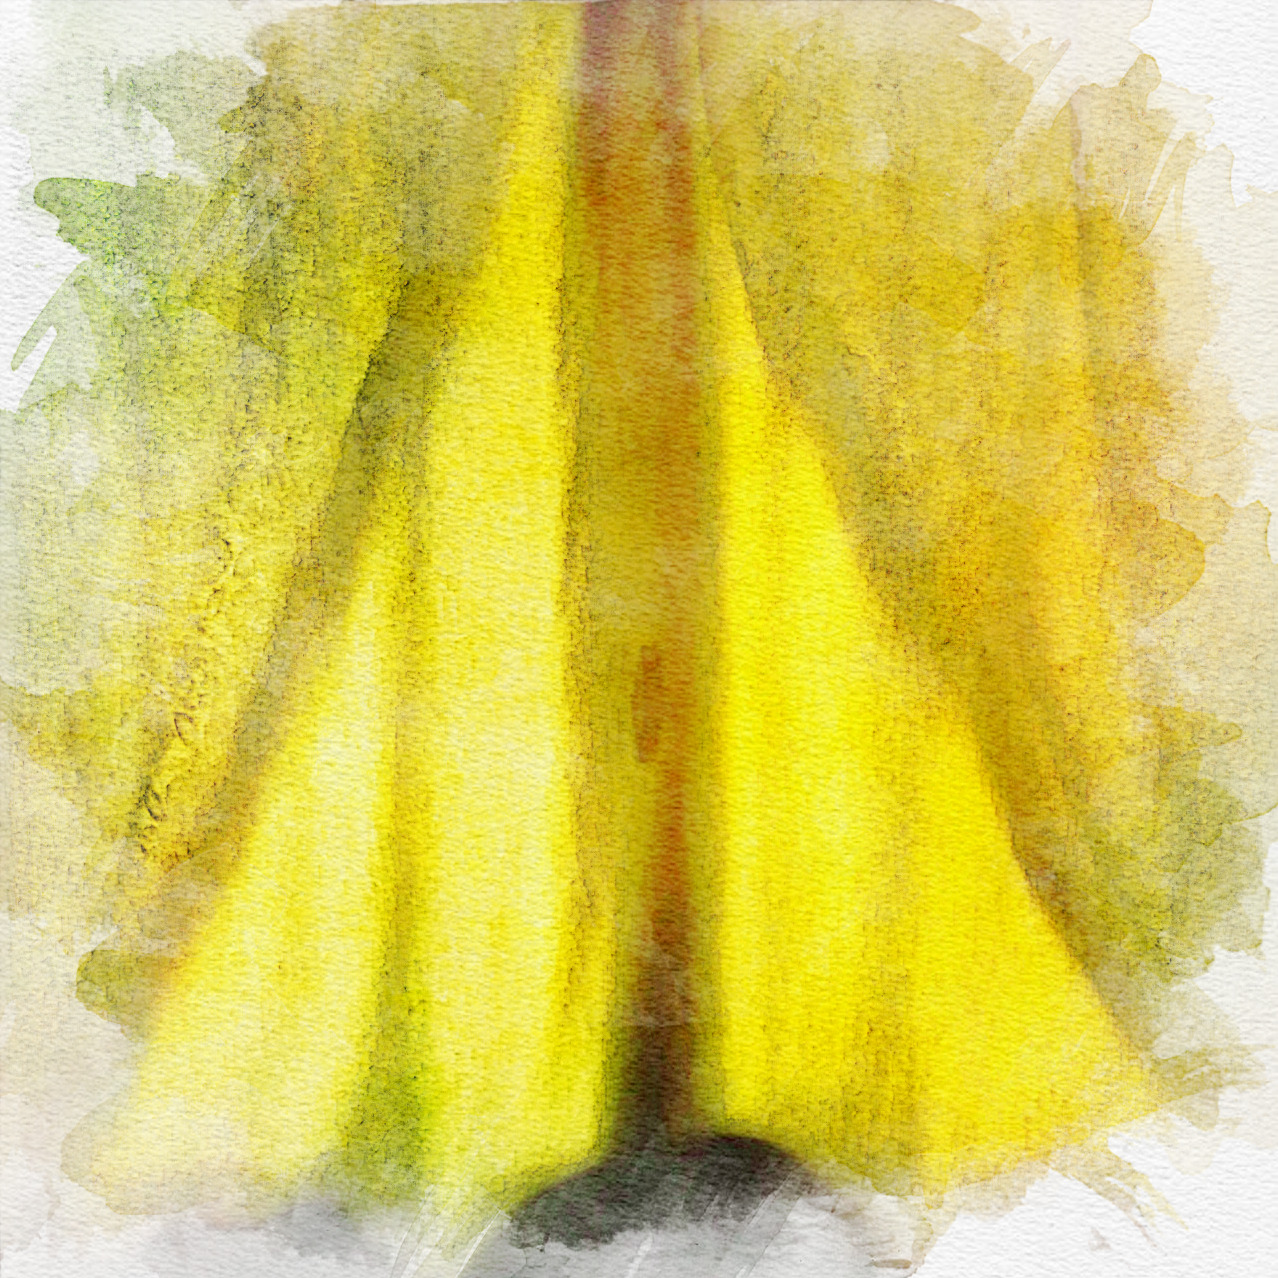 #7 - The Yellow Curtain